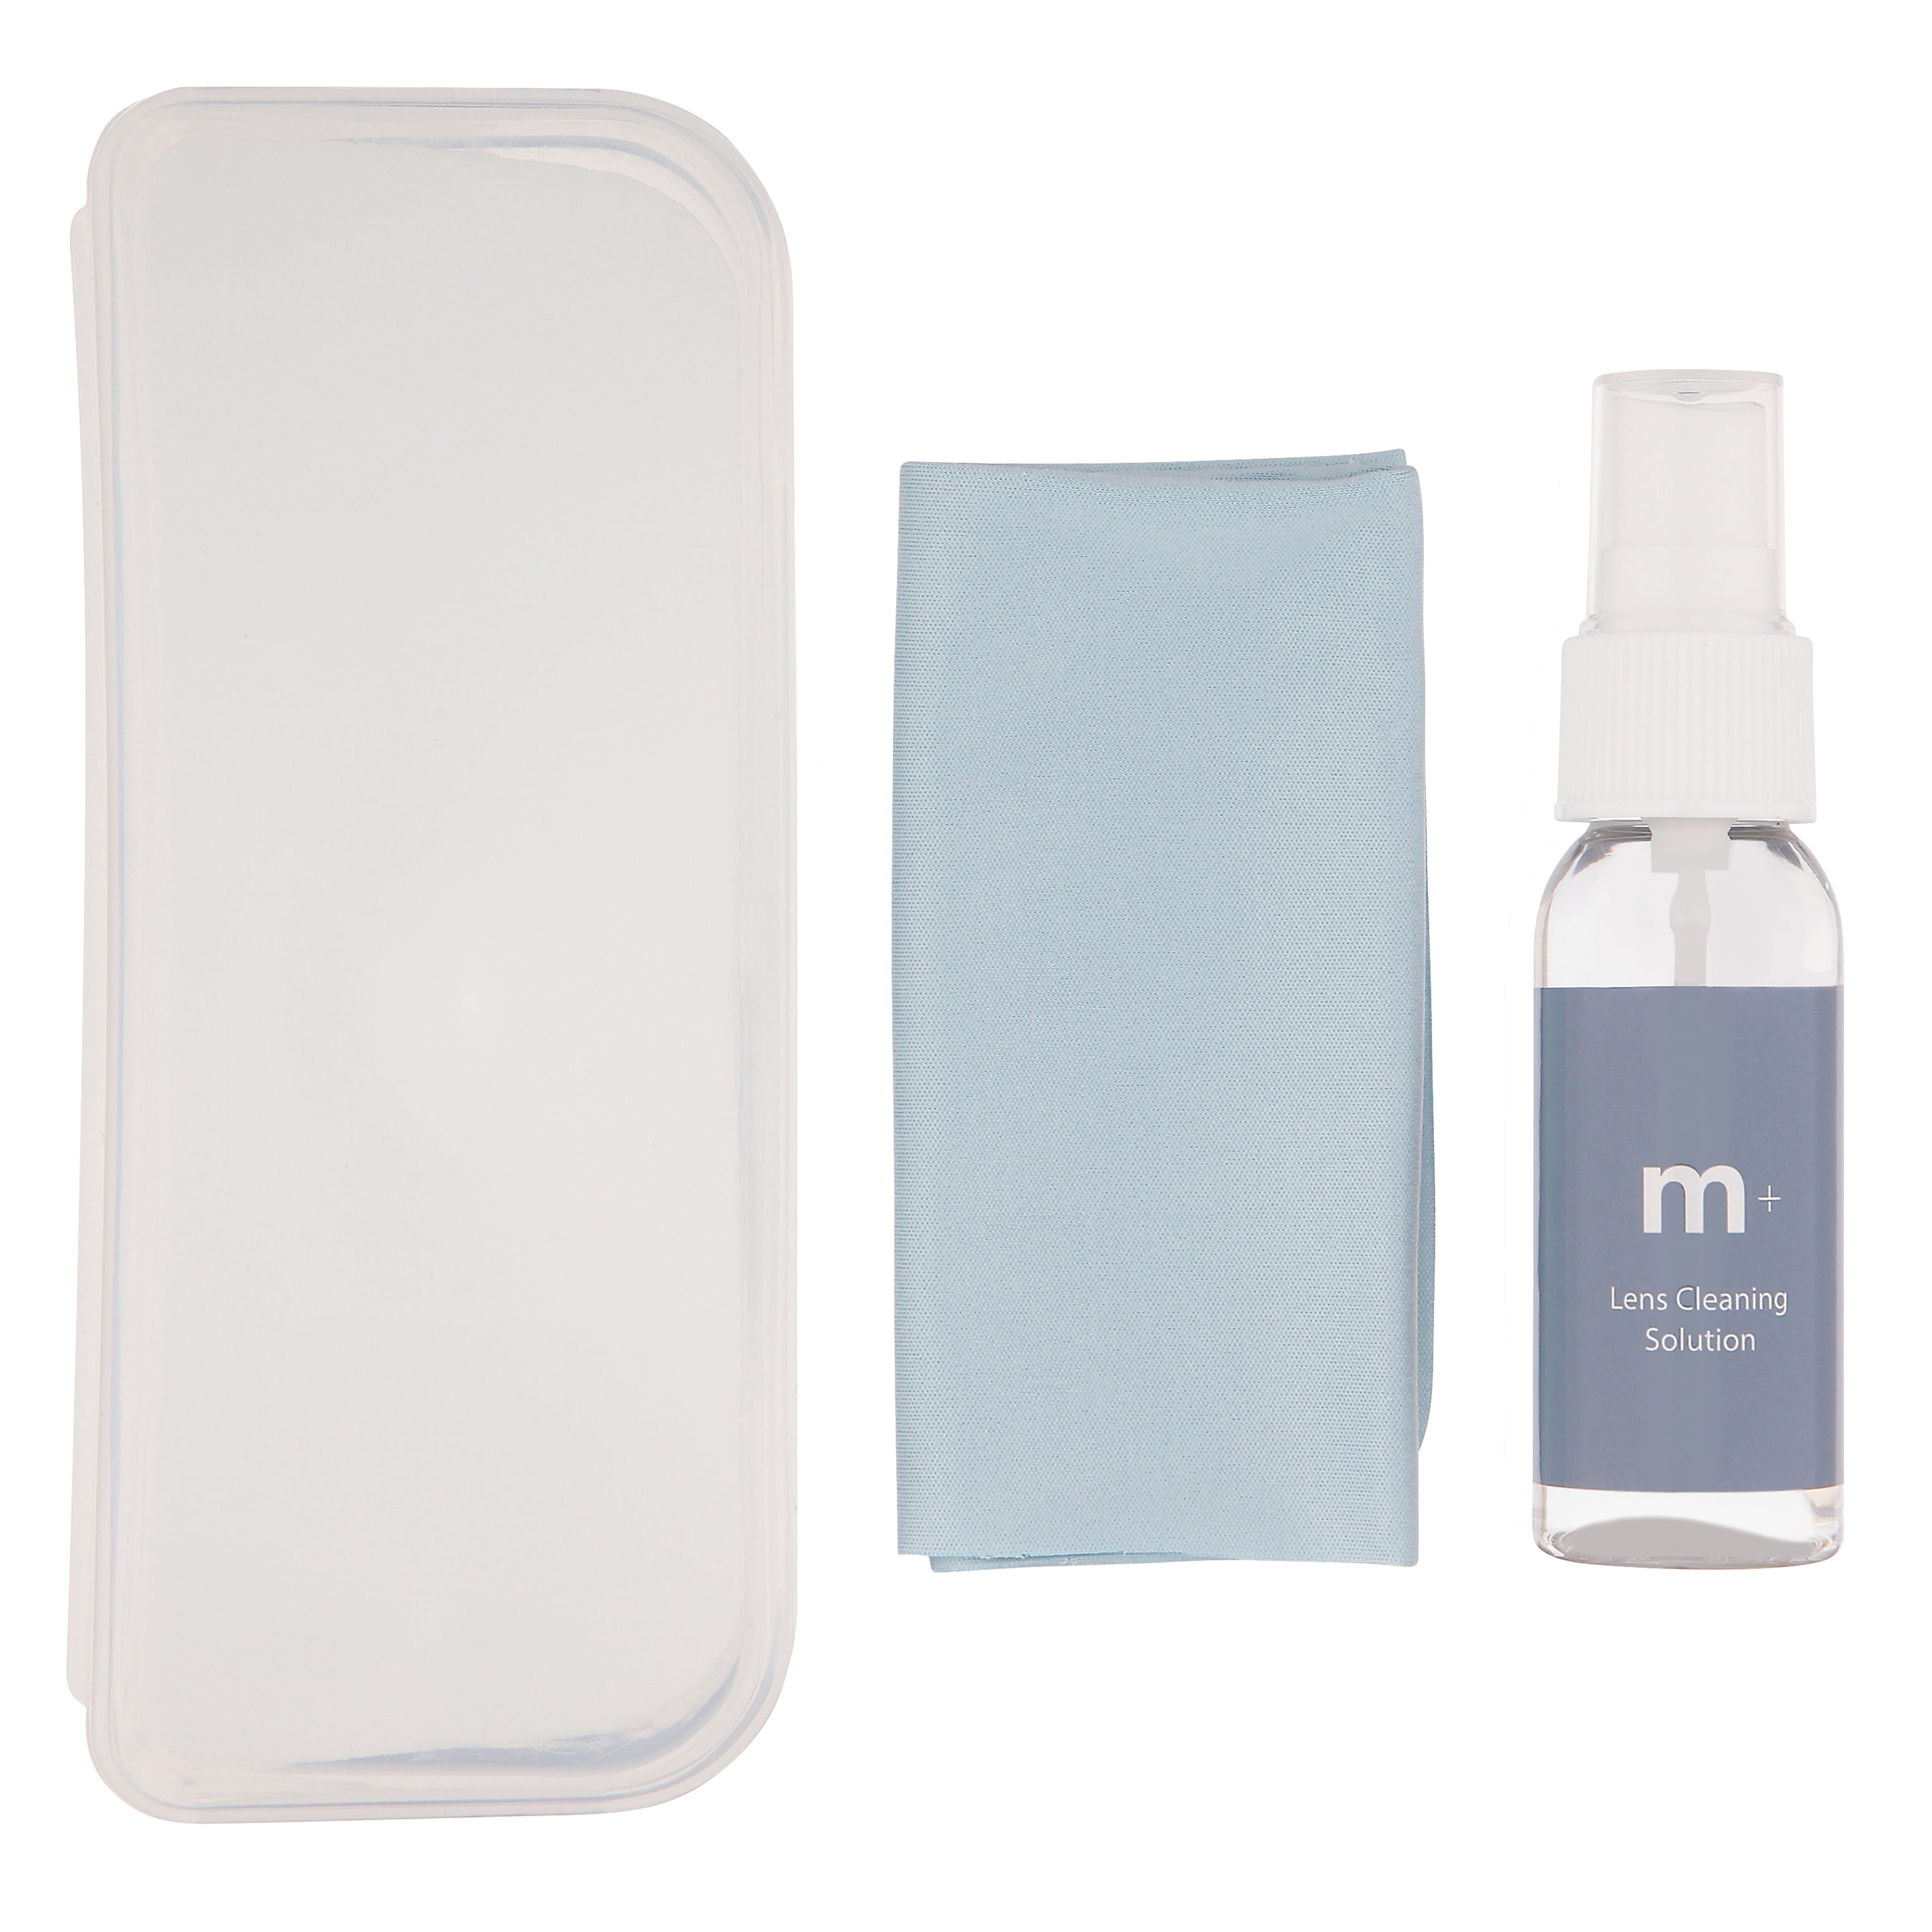 M+ Starter Kit - Includes Fog Cloth, Hard Case, & Cleaning Solution